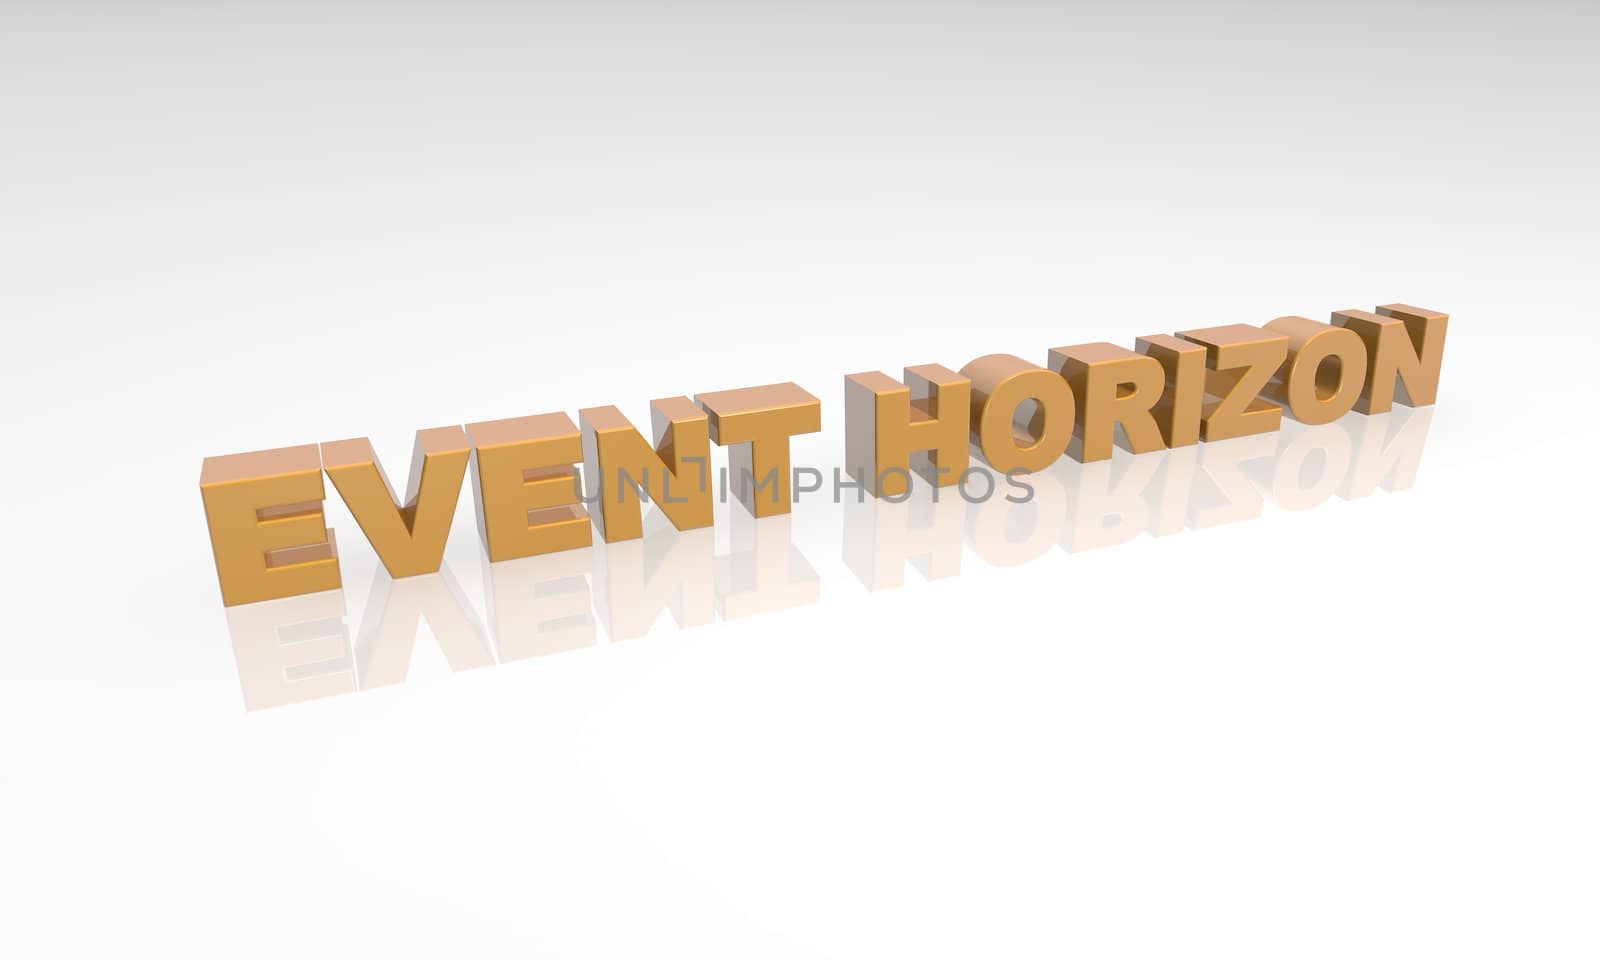 three dimensional text on a white back ground - event horizon by jeremywhat